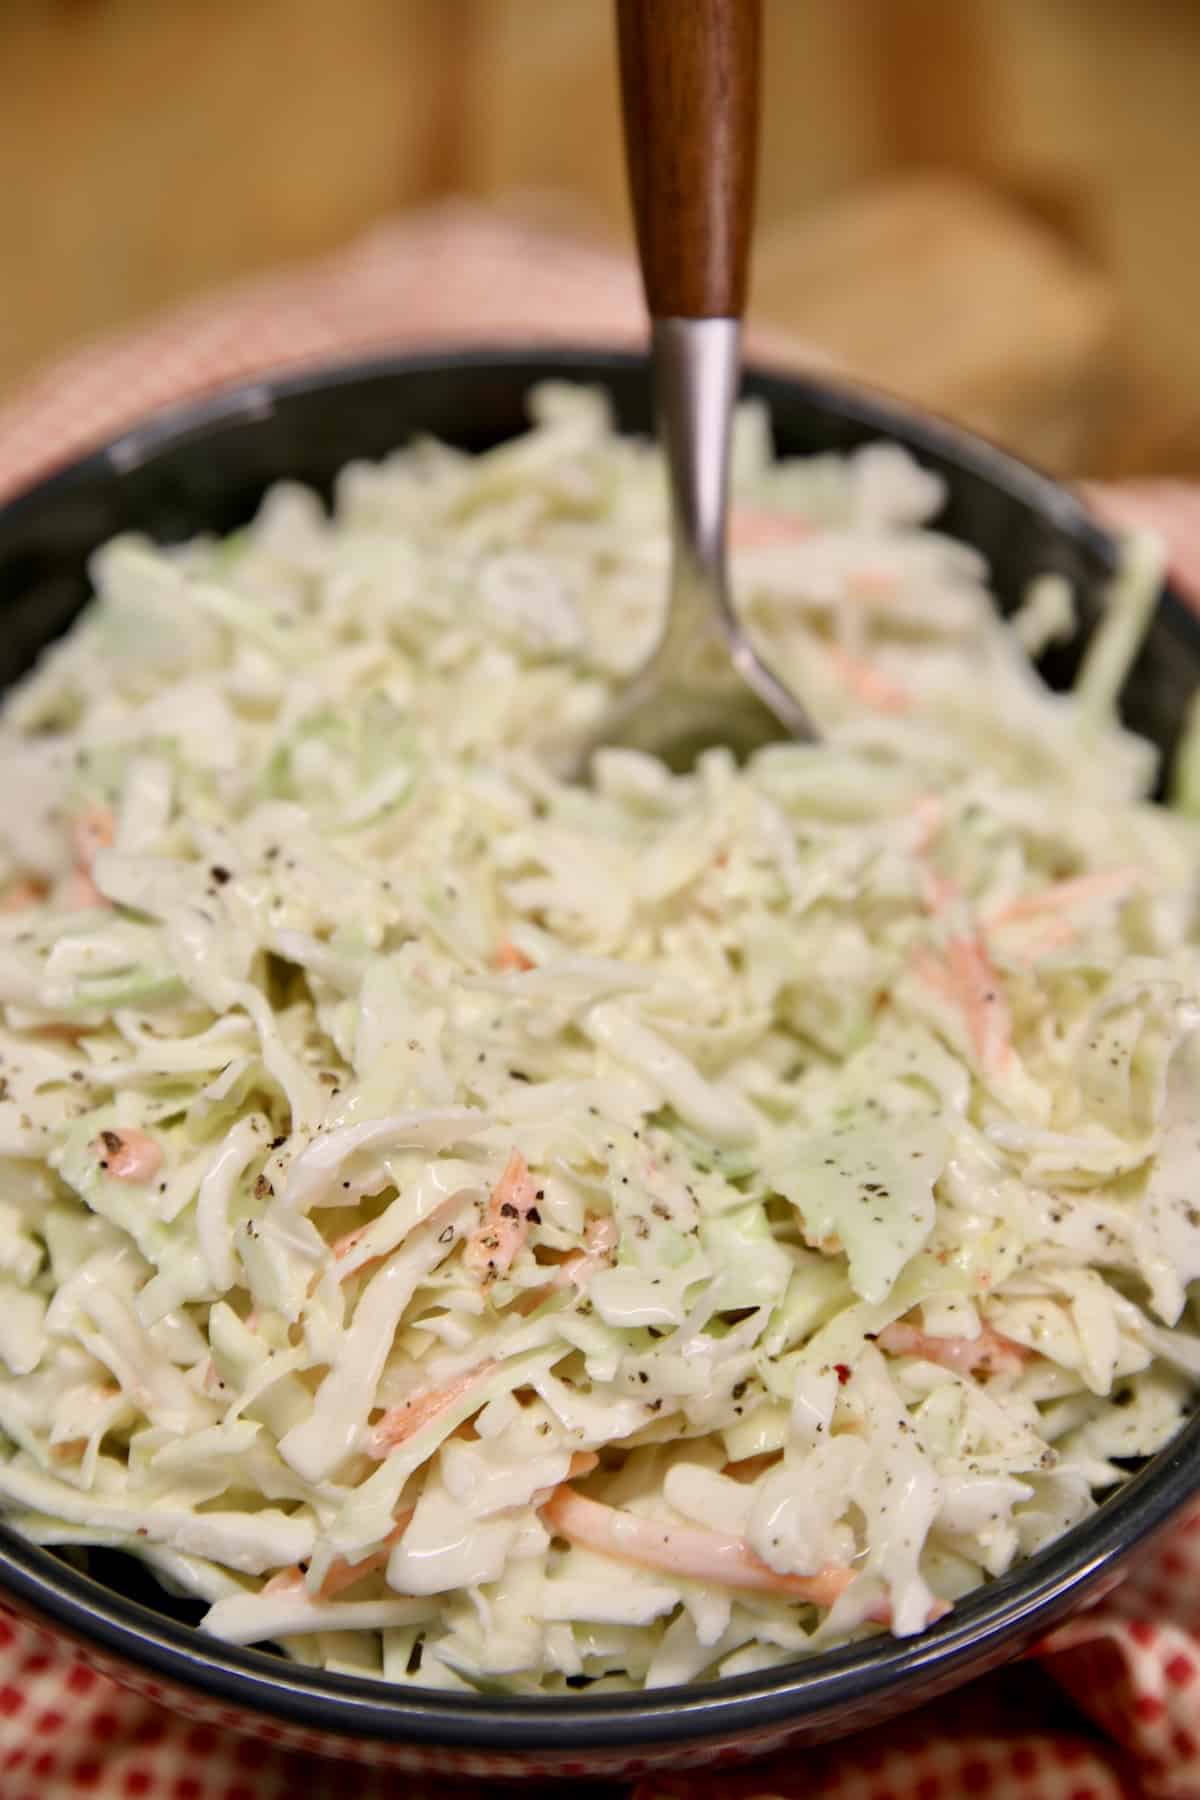 Bowl of coleslaw with spoon.